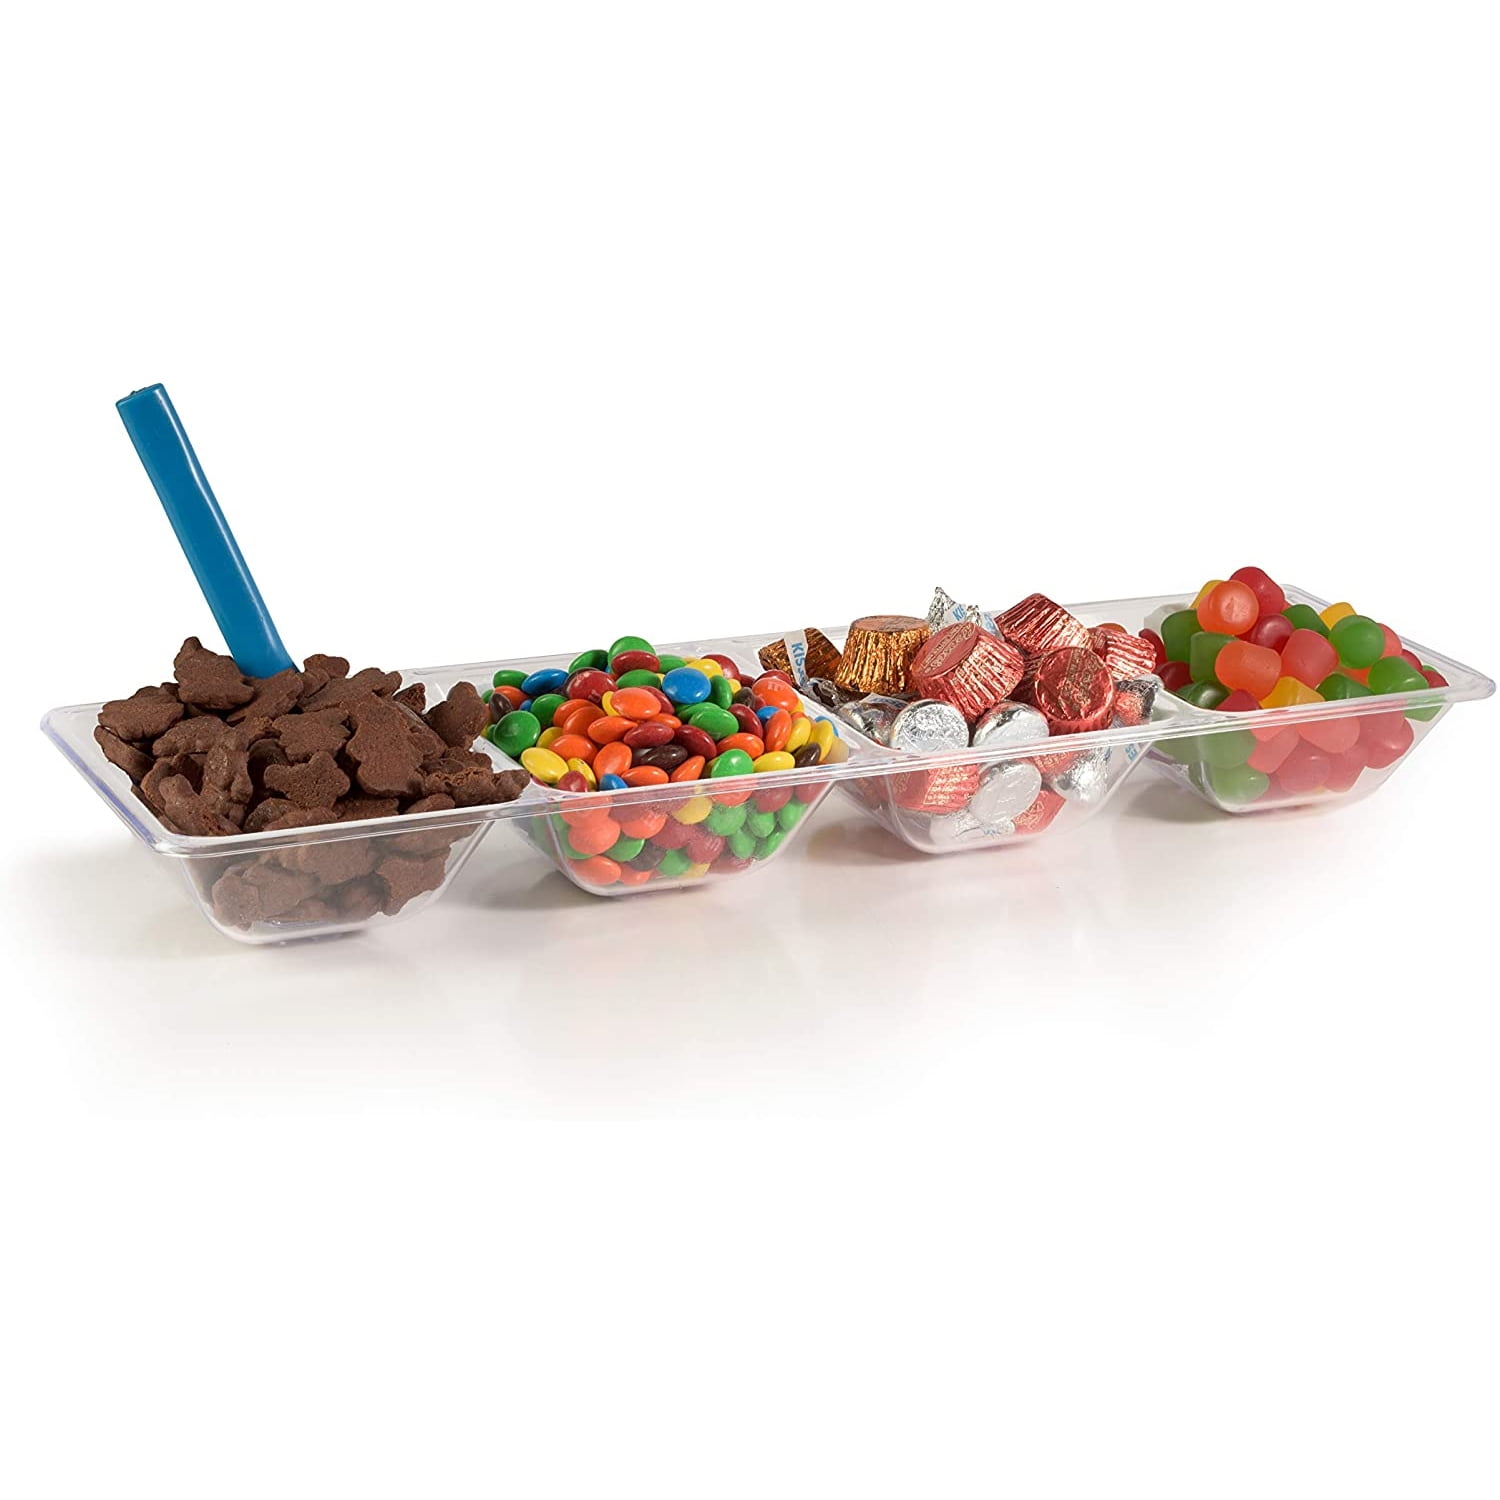  12 Pack Plastic Appetizer Trays with Lids,Disposable